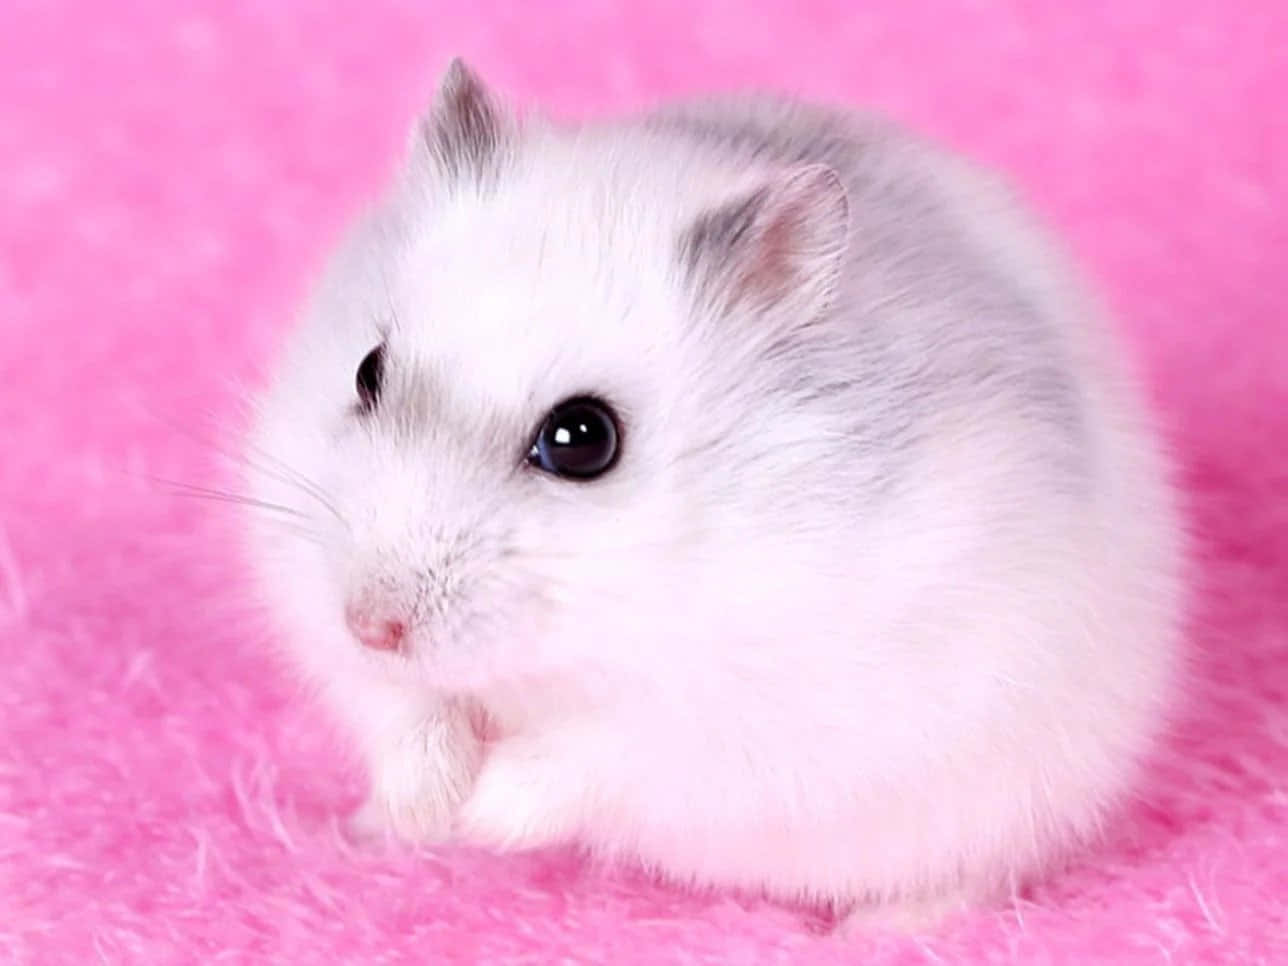 A White Hamster Sitting On A Pink Background